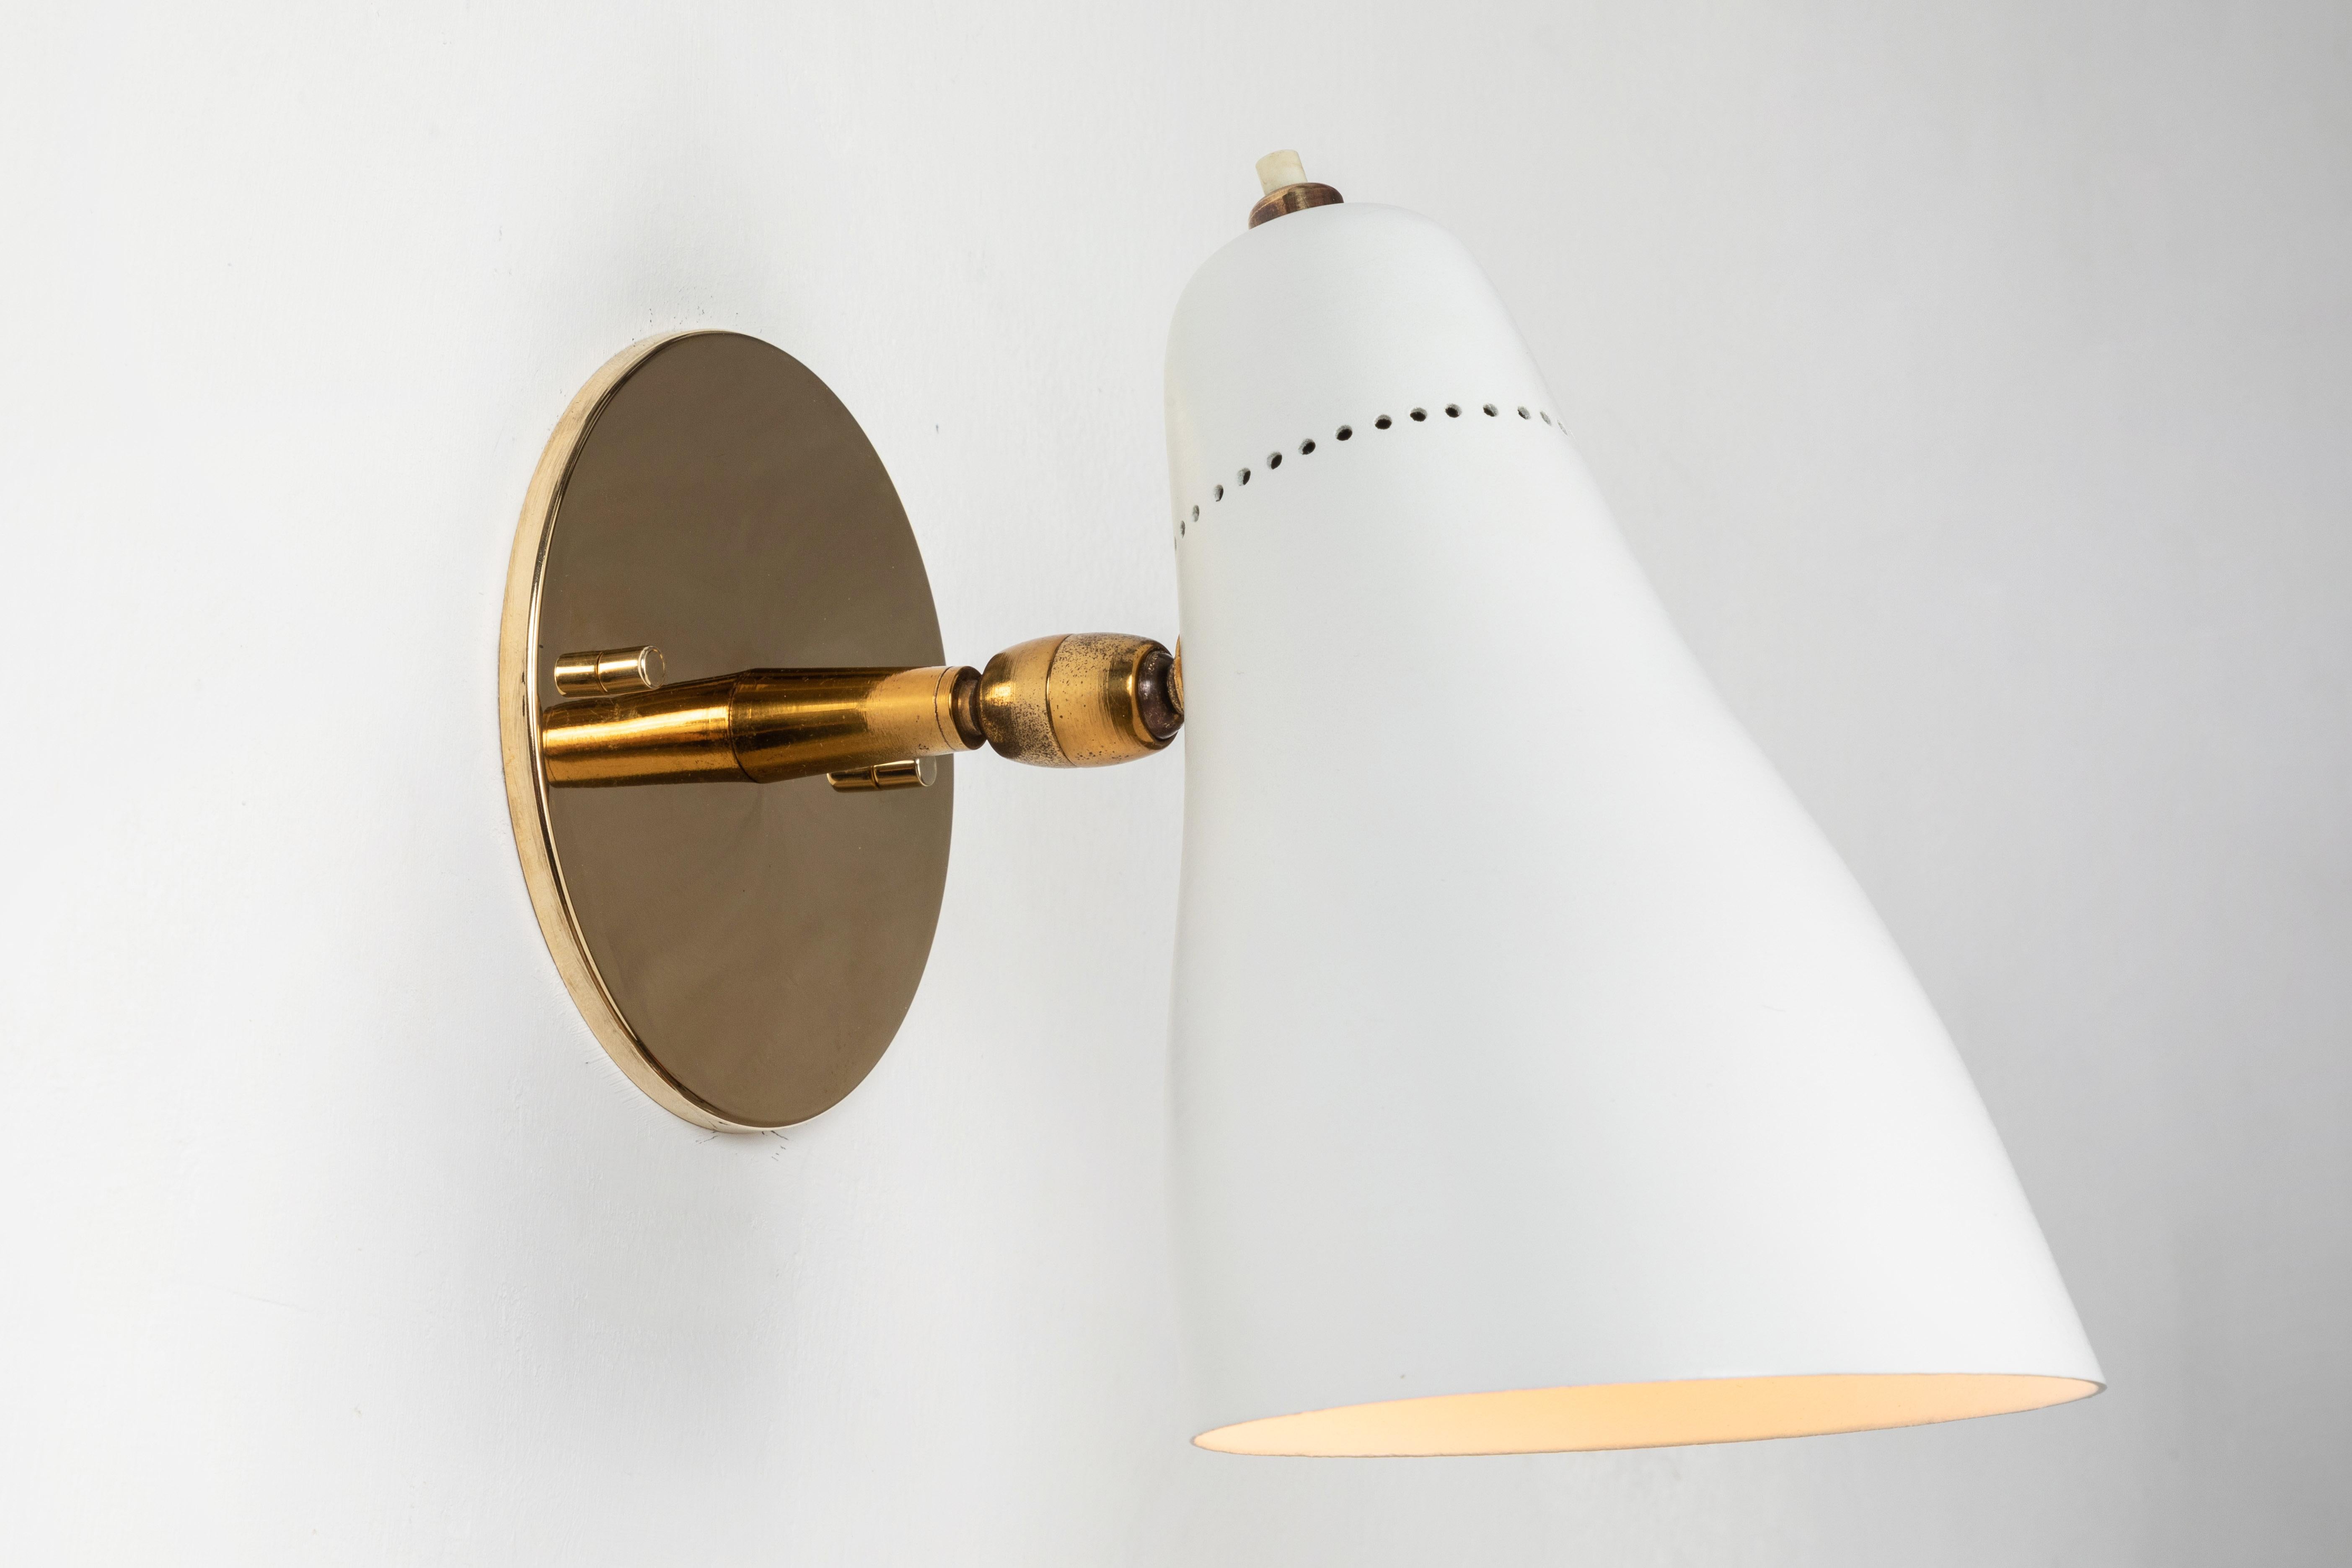 Gino Sarfatti Perforated cone sconce for Arteluce, circa 1950. Executed in white painted aluminum and brass. Ball jointed arm connection to shade allows for flexible shade adjustments and multiple configurations. The simplicity of Sarfatti's design